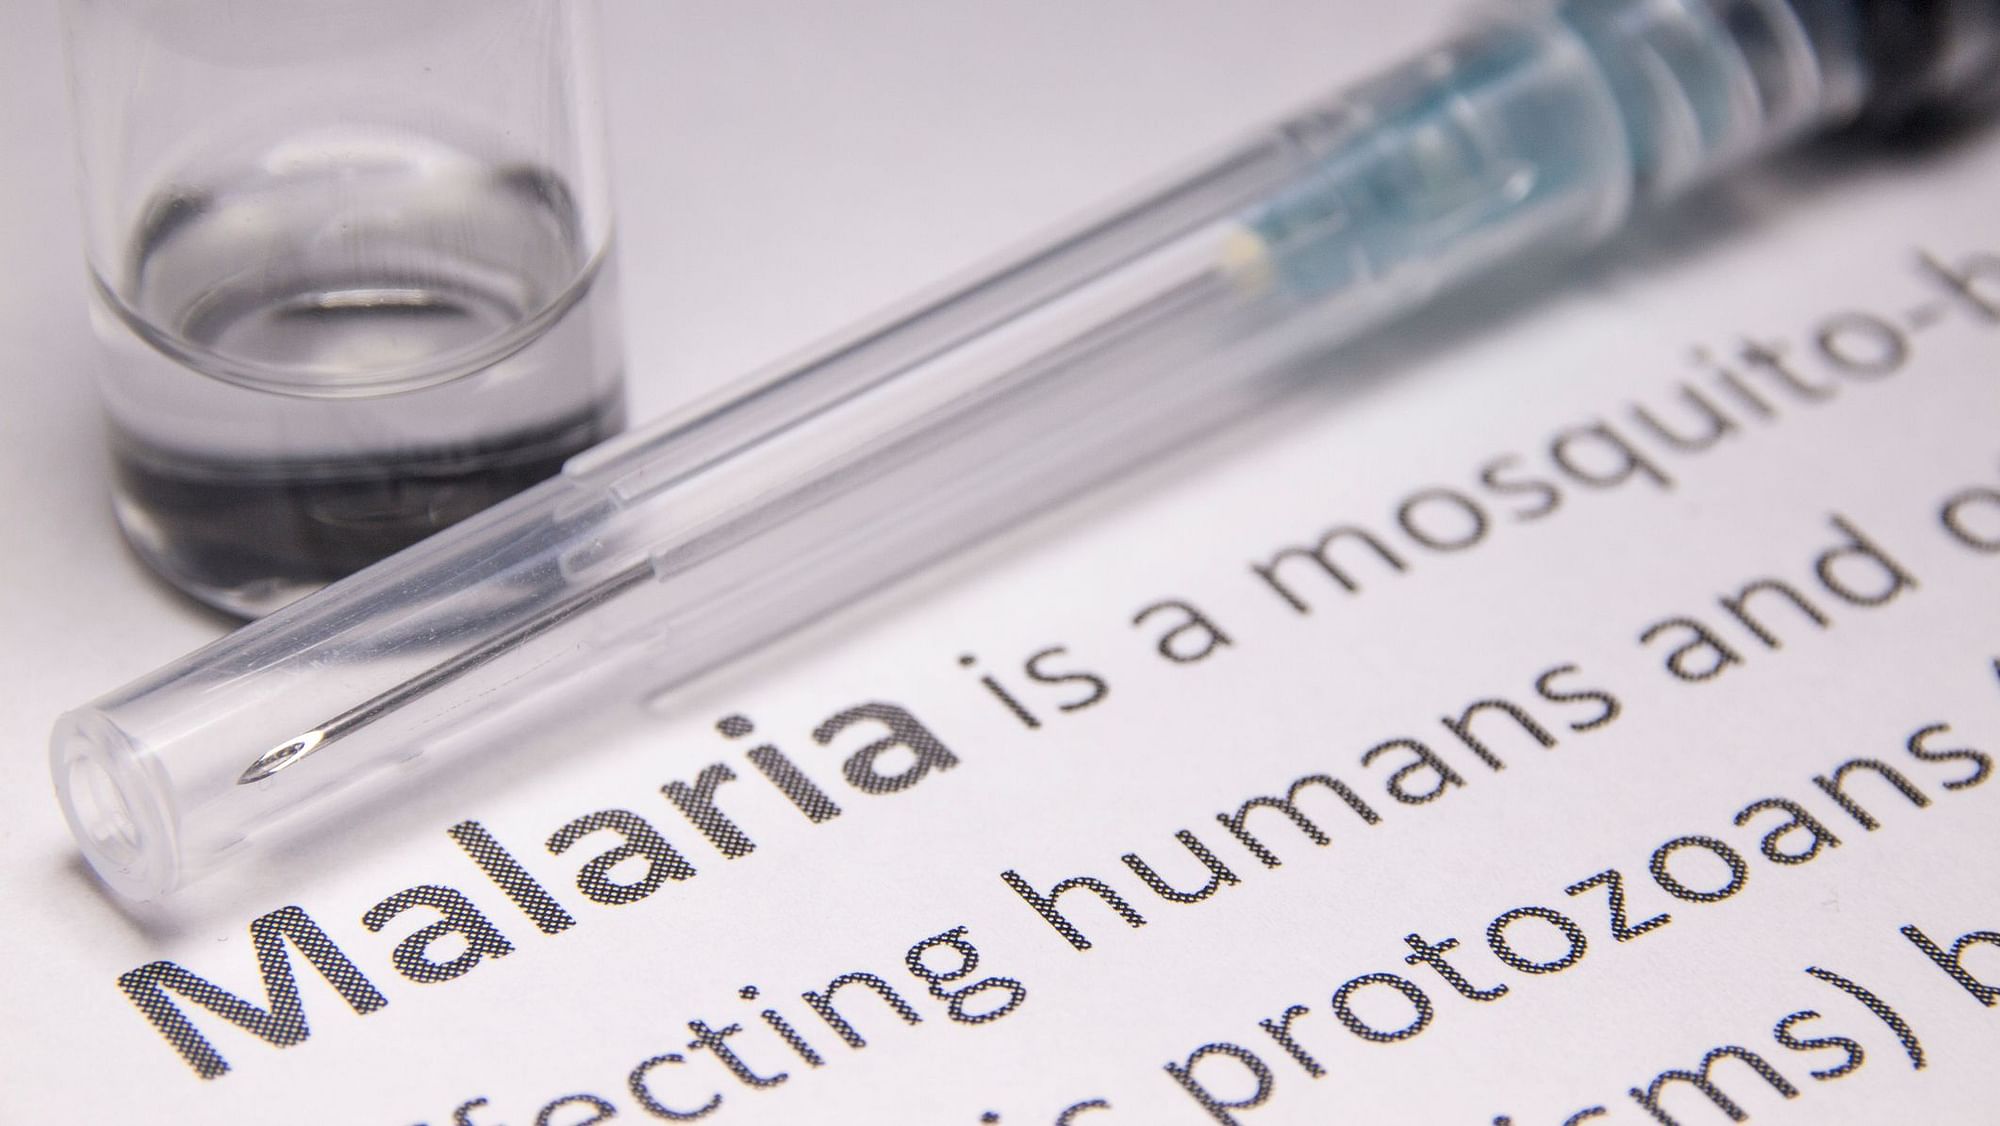 Theoretically possible to wipe out malaria, but probably not with the flawed vaccine 